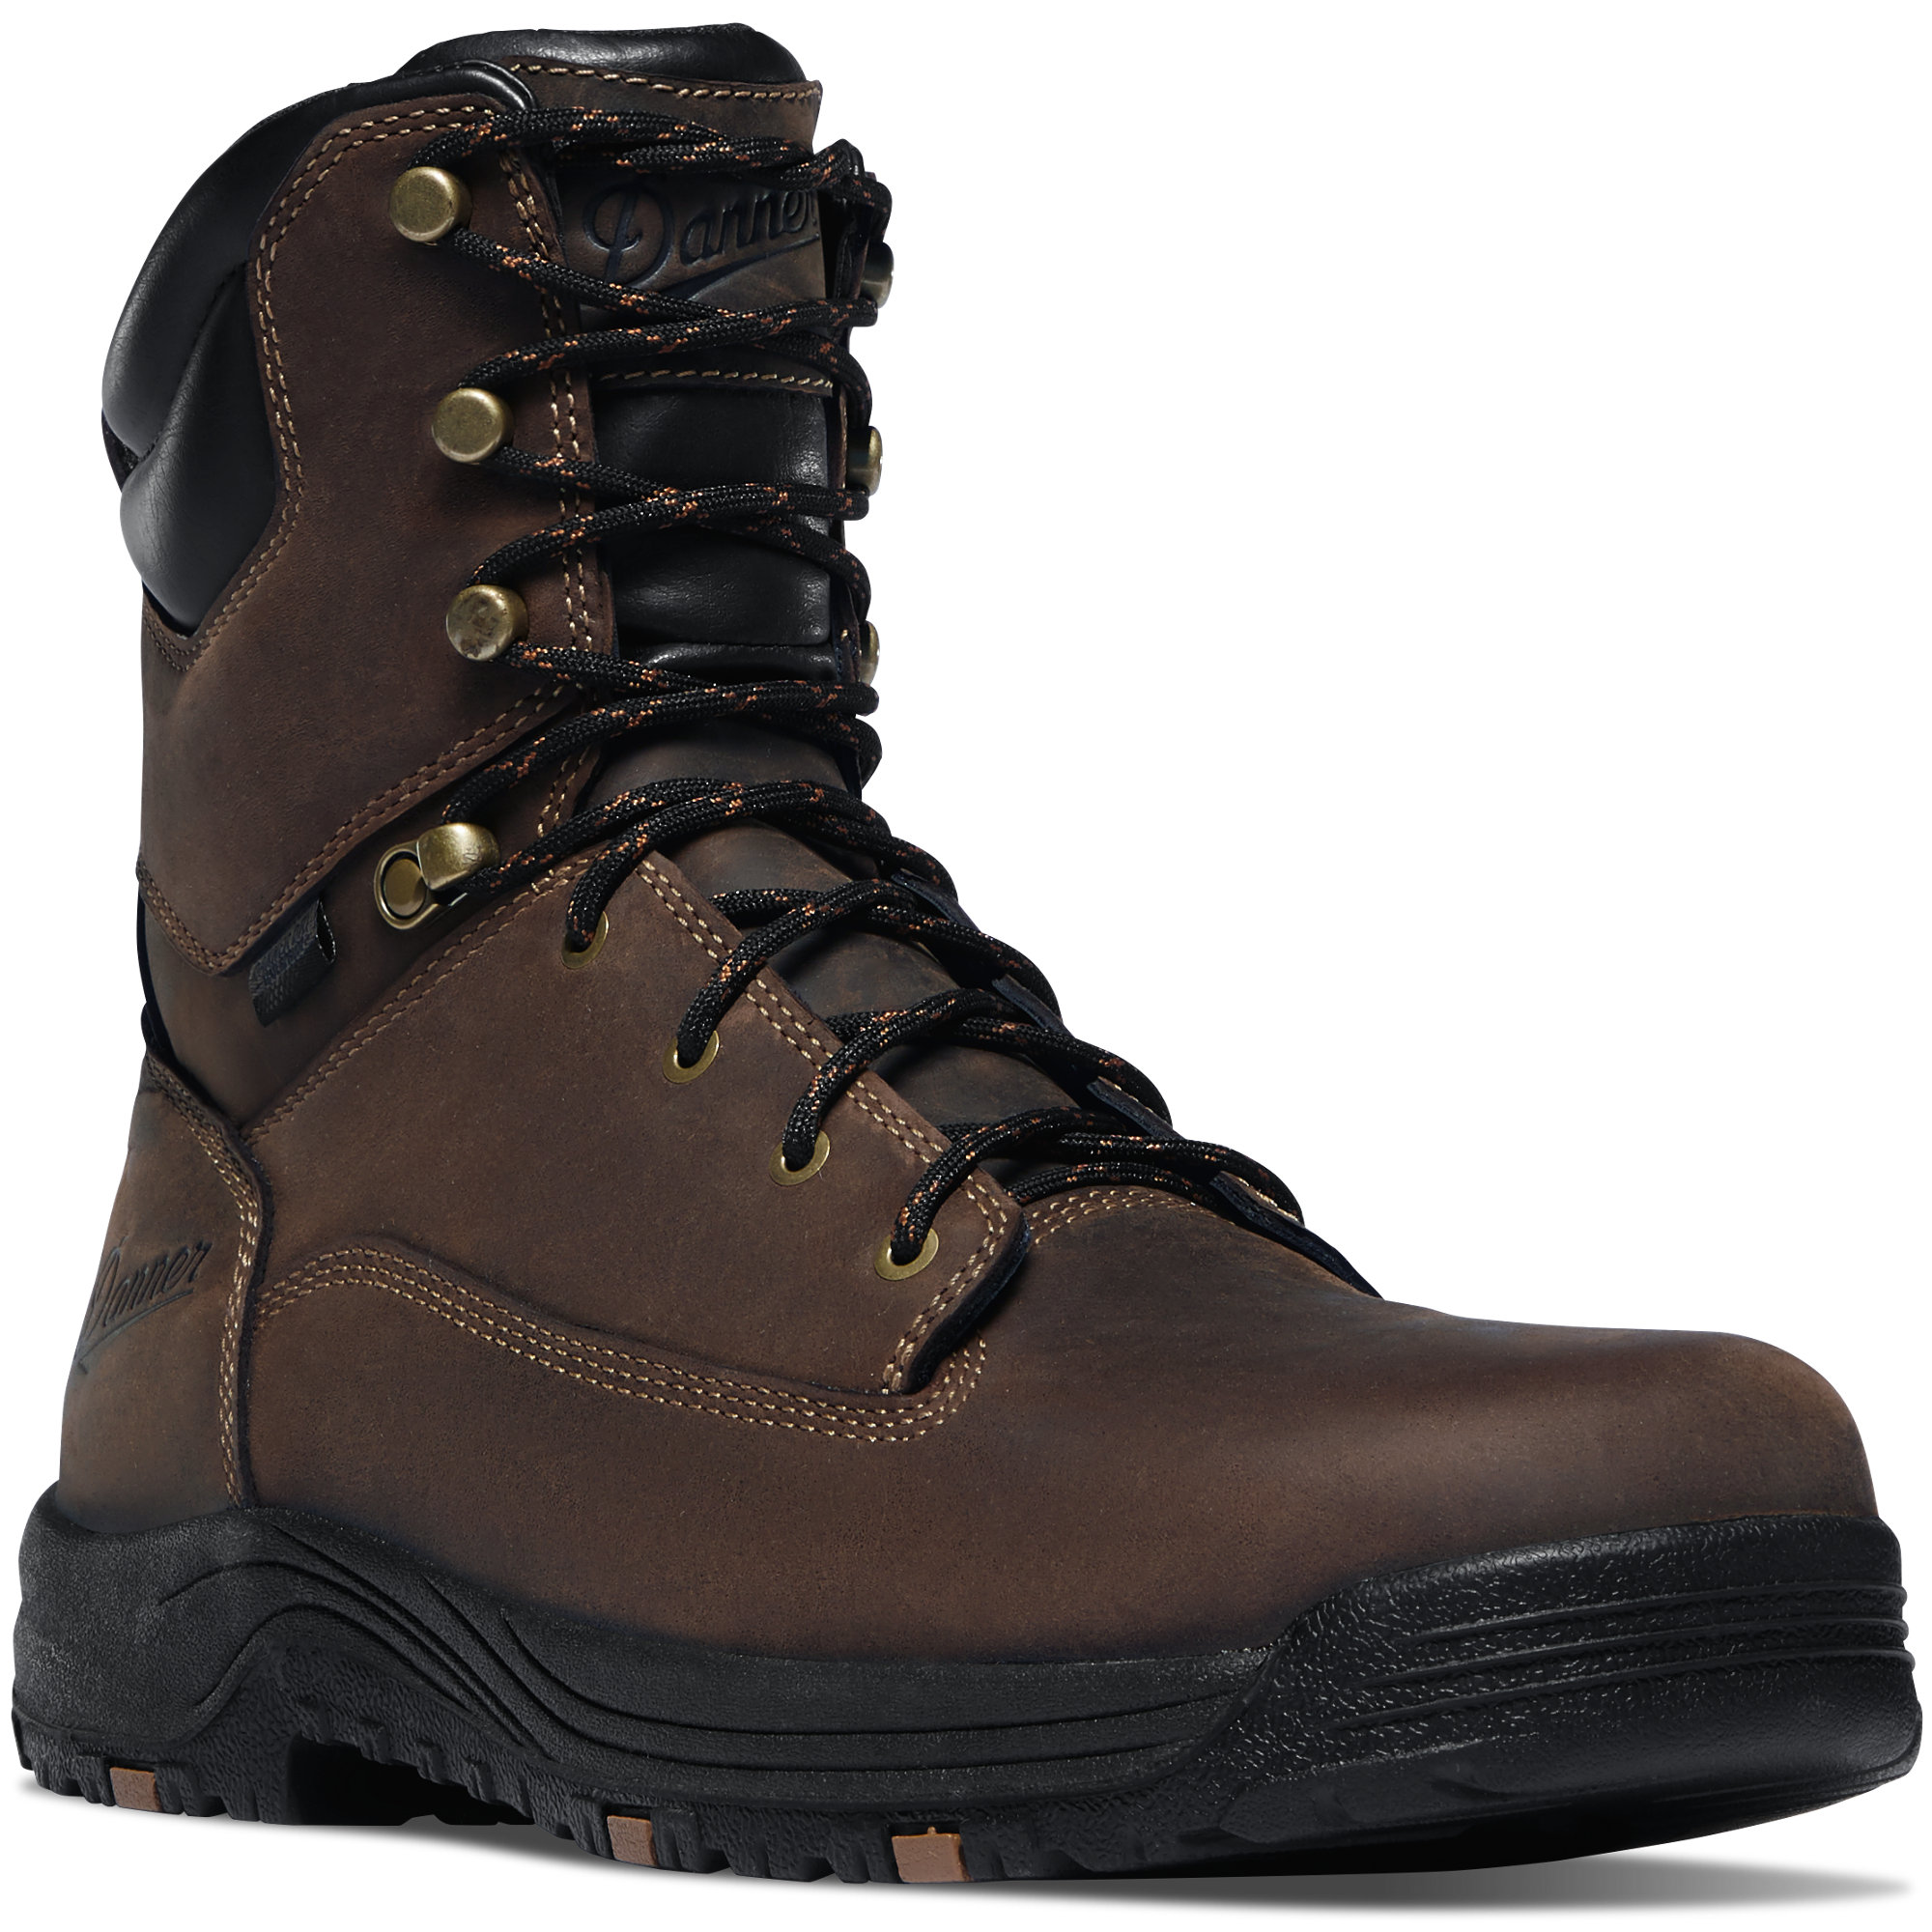 Danner Men's 8-Inch Caliper Aluminum Toe Boots from GME Supply